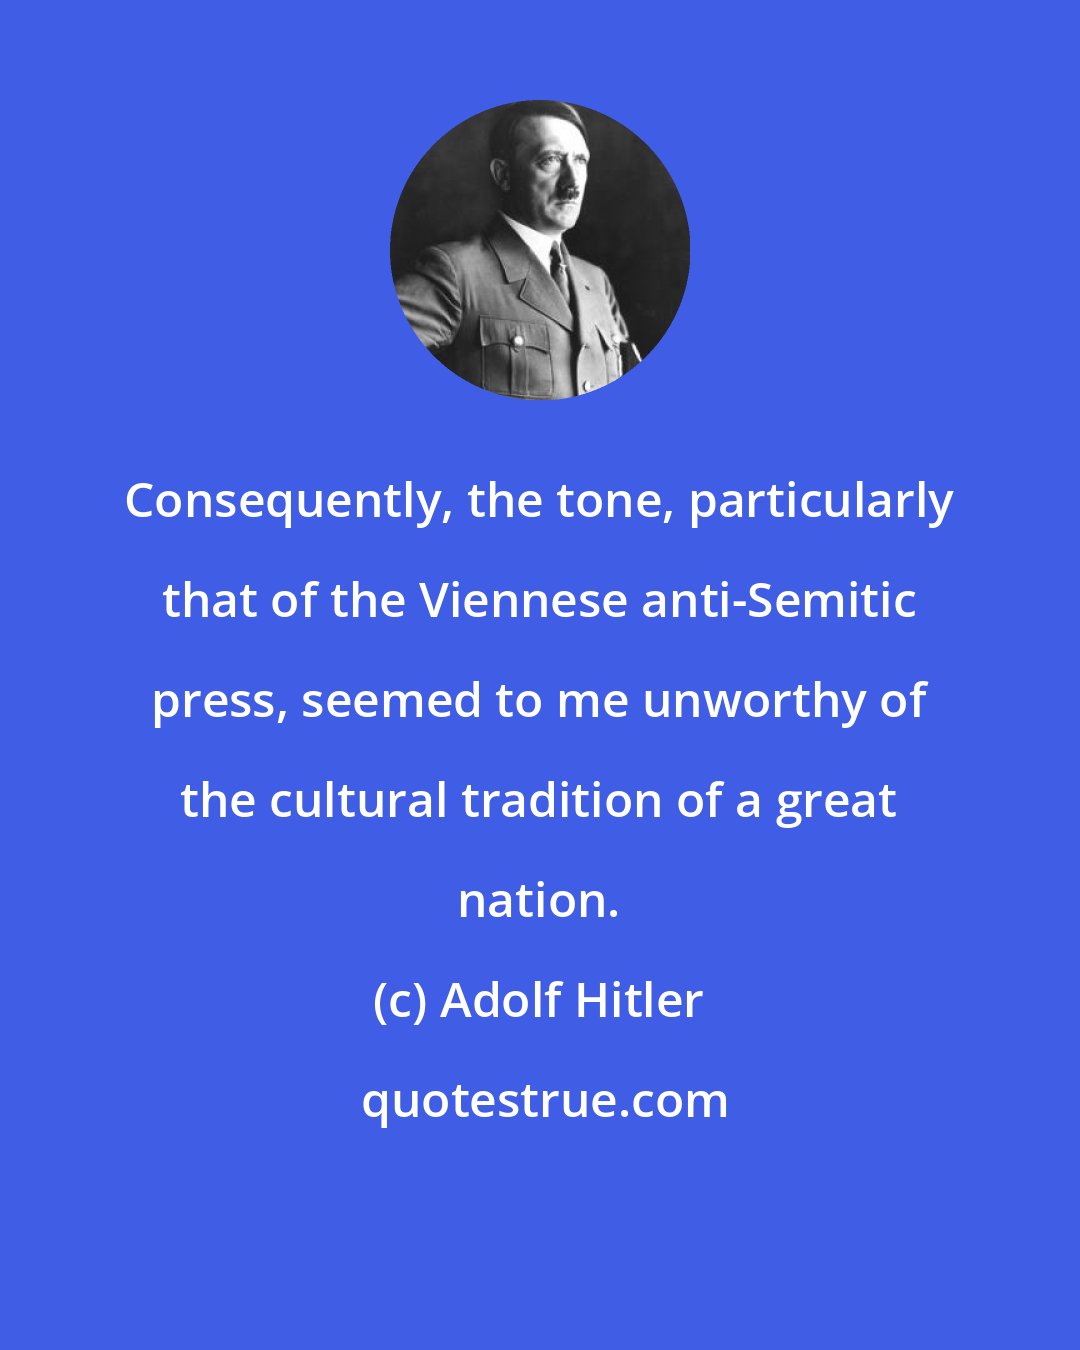 Adolf Hitler: Consequently, the tone, particularly that of the Viennese anti-Semitic press, seemed to me unworthy of the cultural tradition of a great nation.